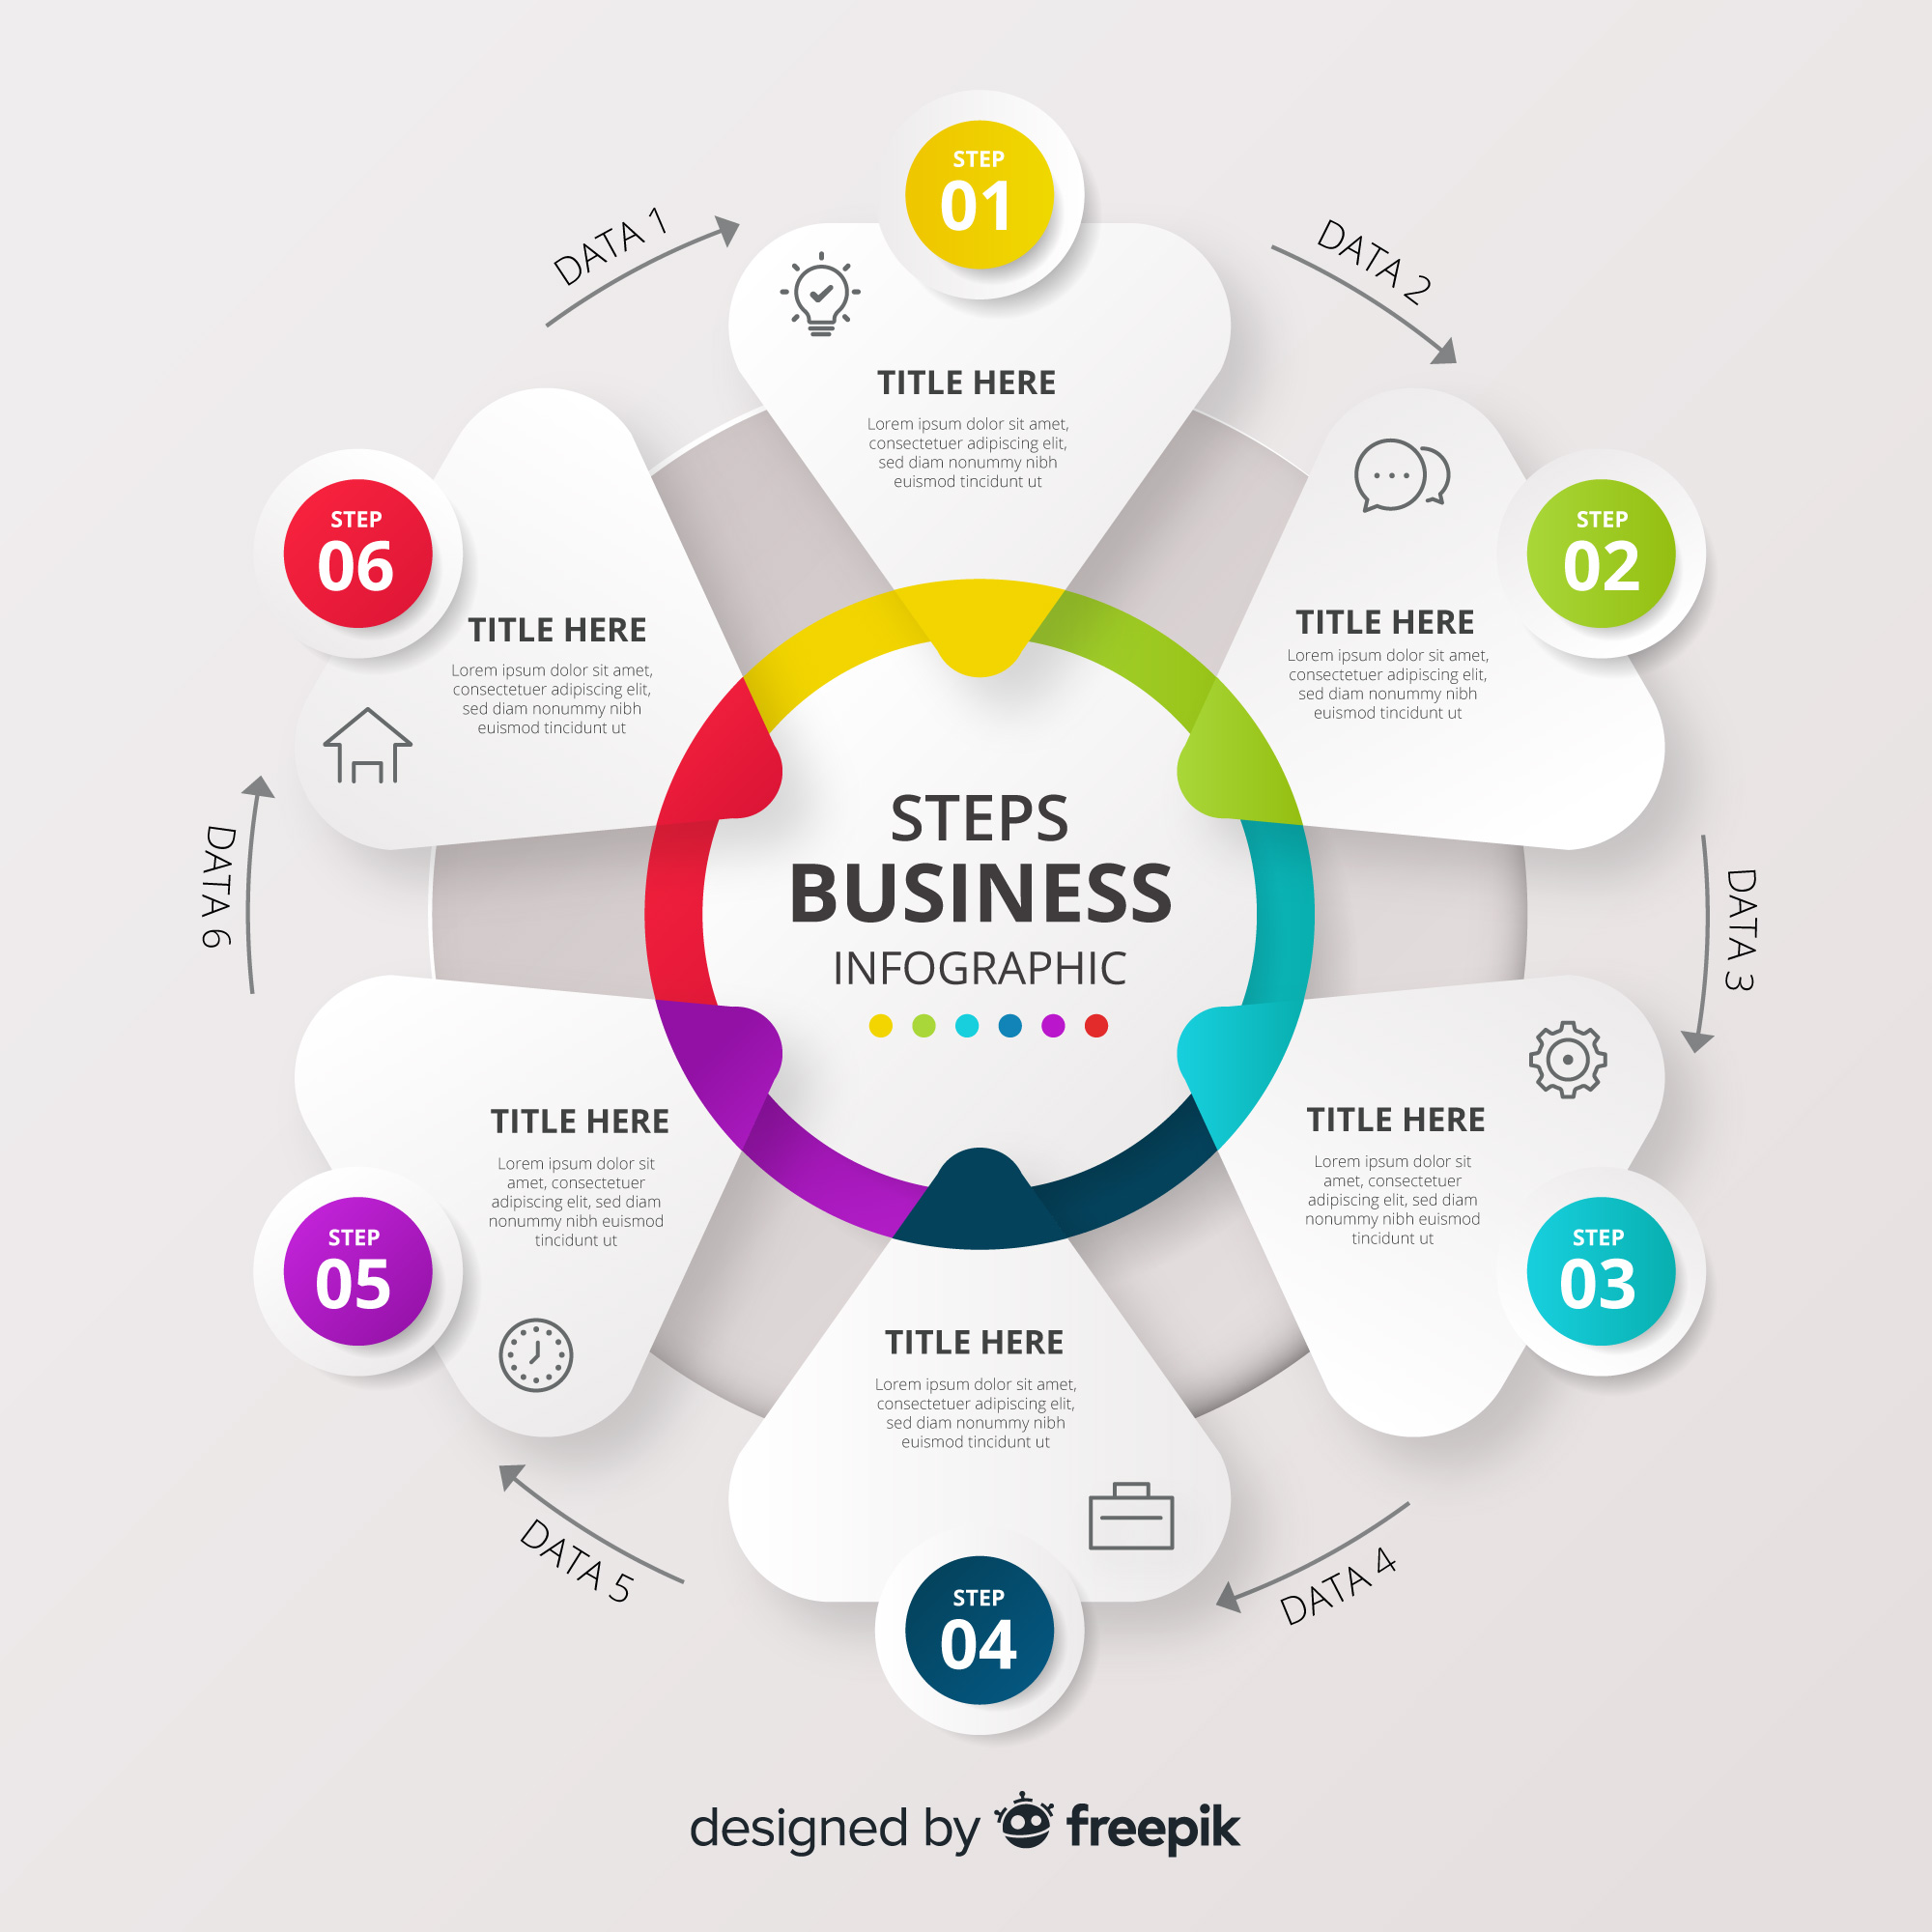 9VvlivQg

z TITLE HERE

far

TITLE HERE

Gy) A

a,

    
 

STEPS
BUSINESS

INFOGRAPHIC
seo e

 
 

TITLE HERE

    
   
  

TITLE HERE

TITLE HERE "4

E

designed by '® freepik

©

€ viva